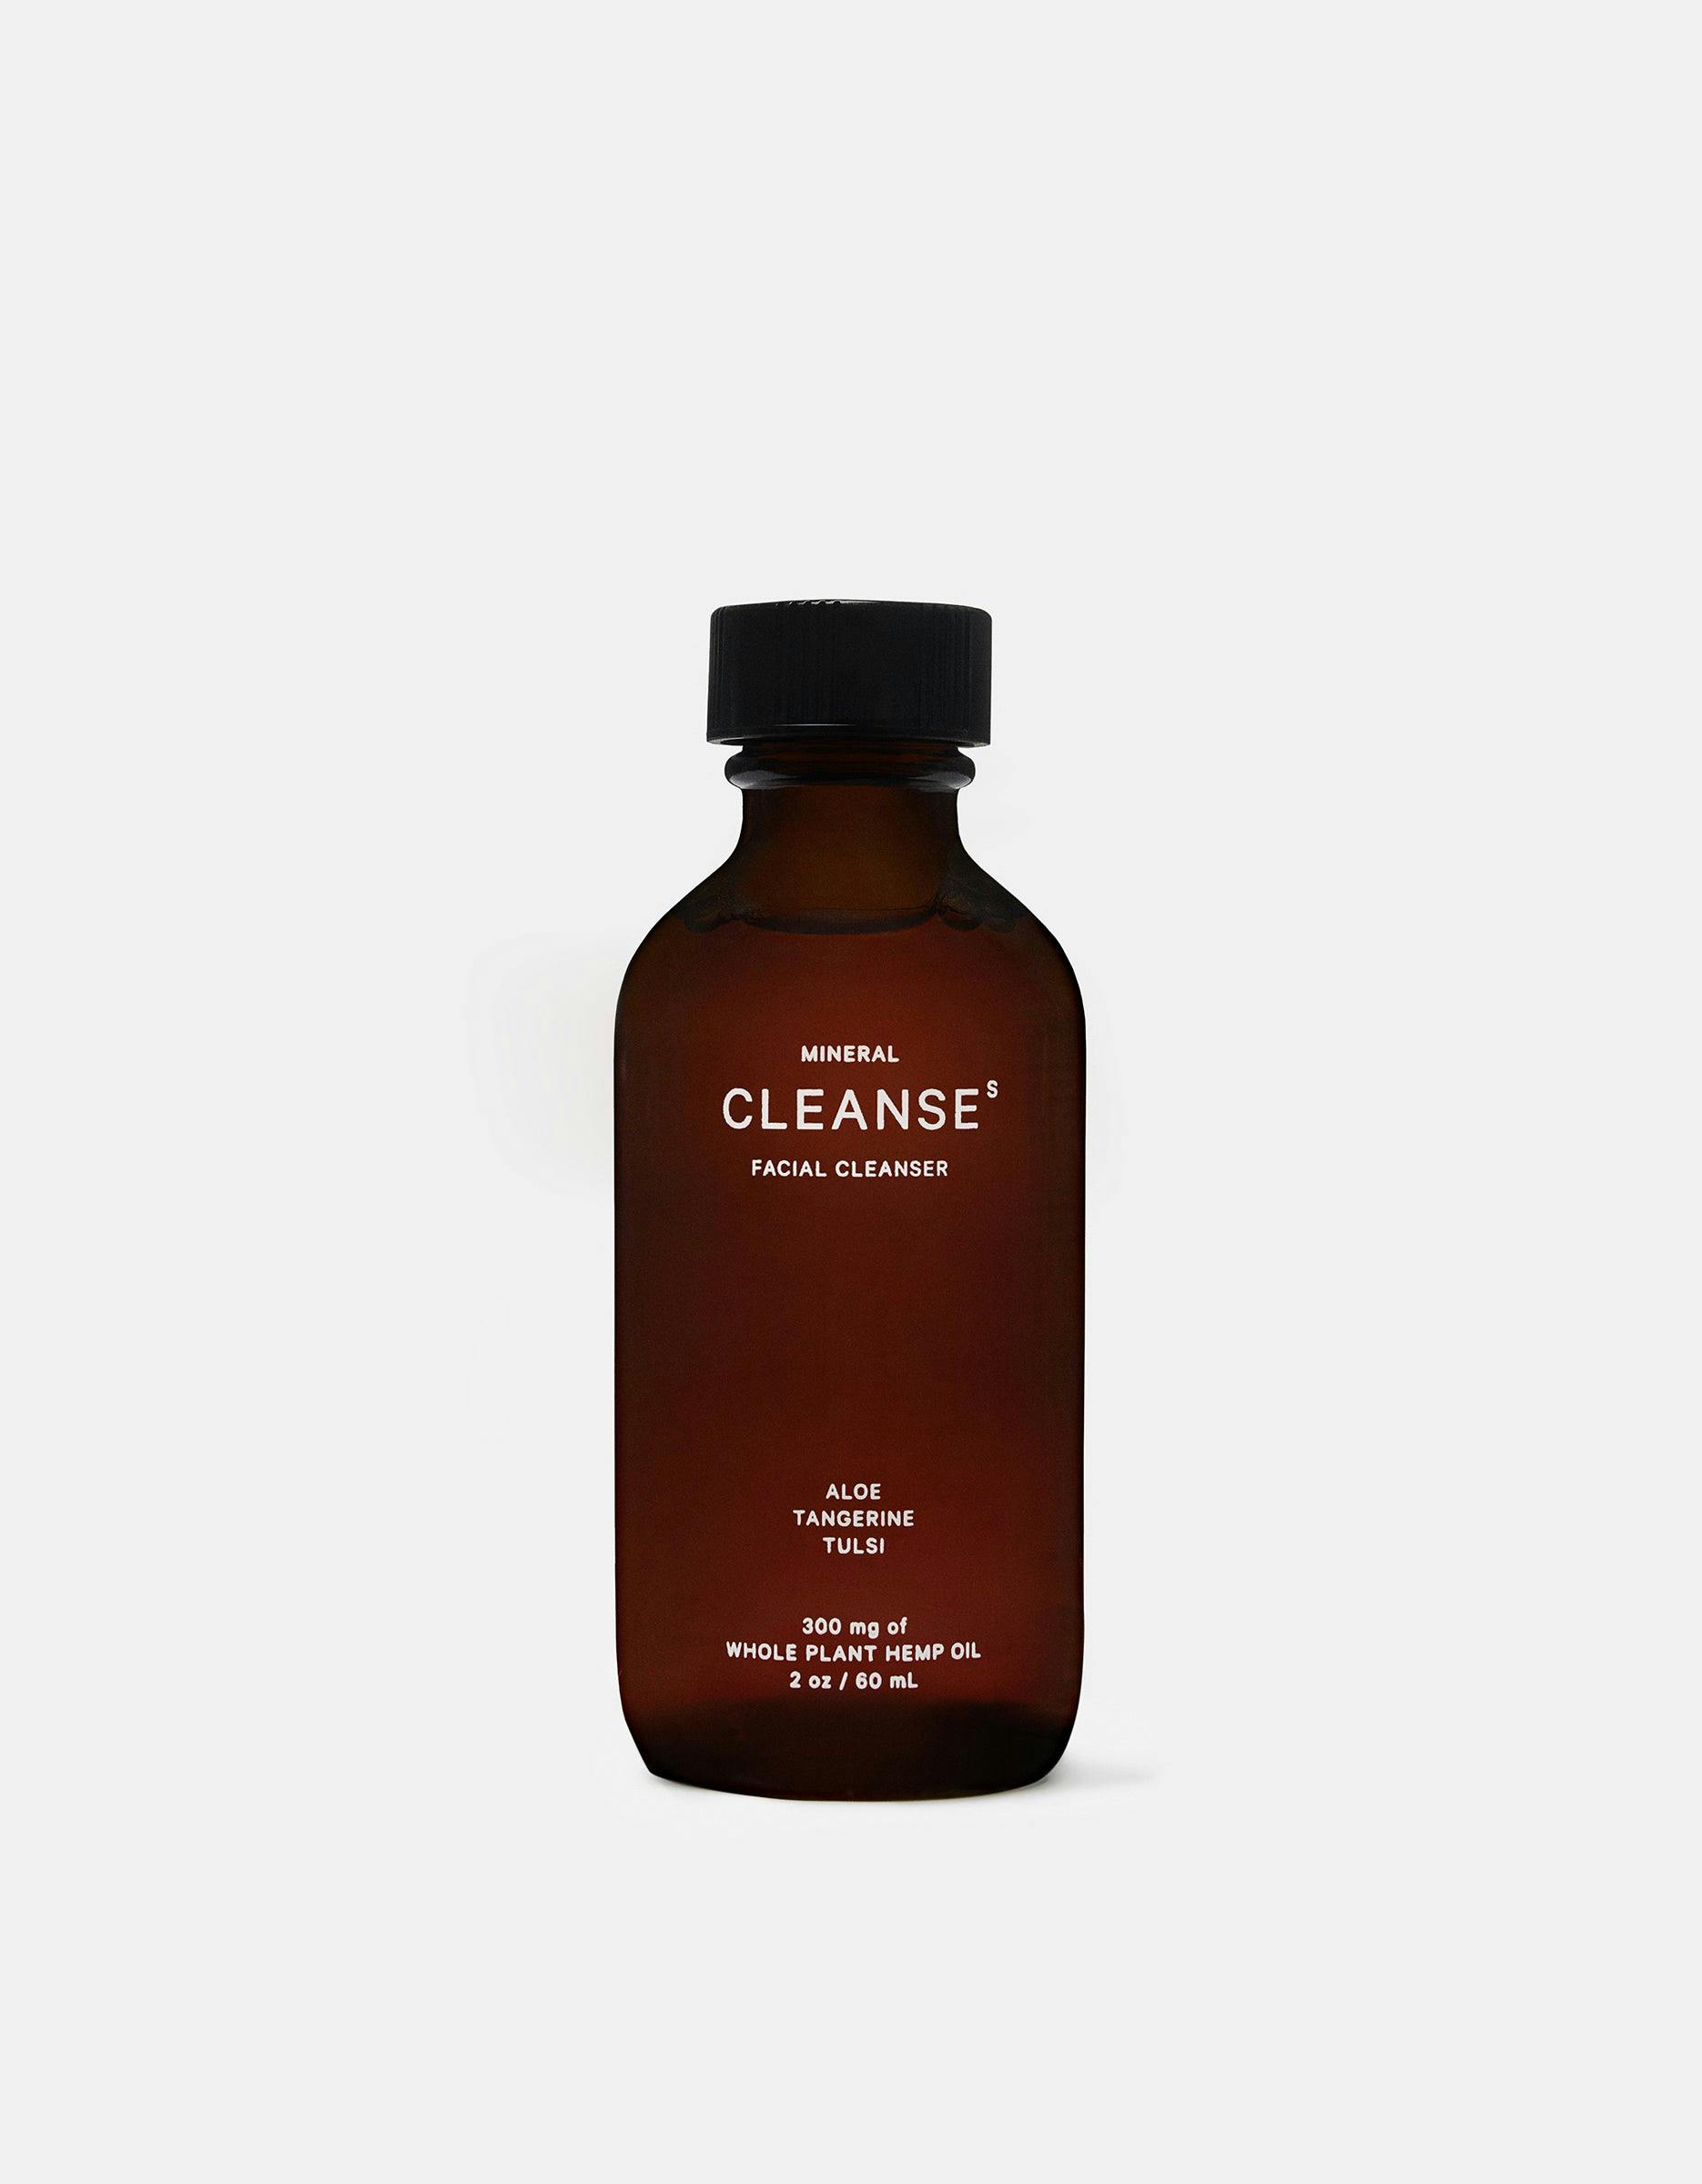 MINERAL CLEANSE product